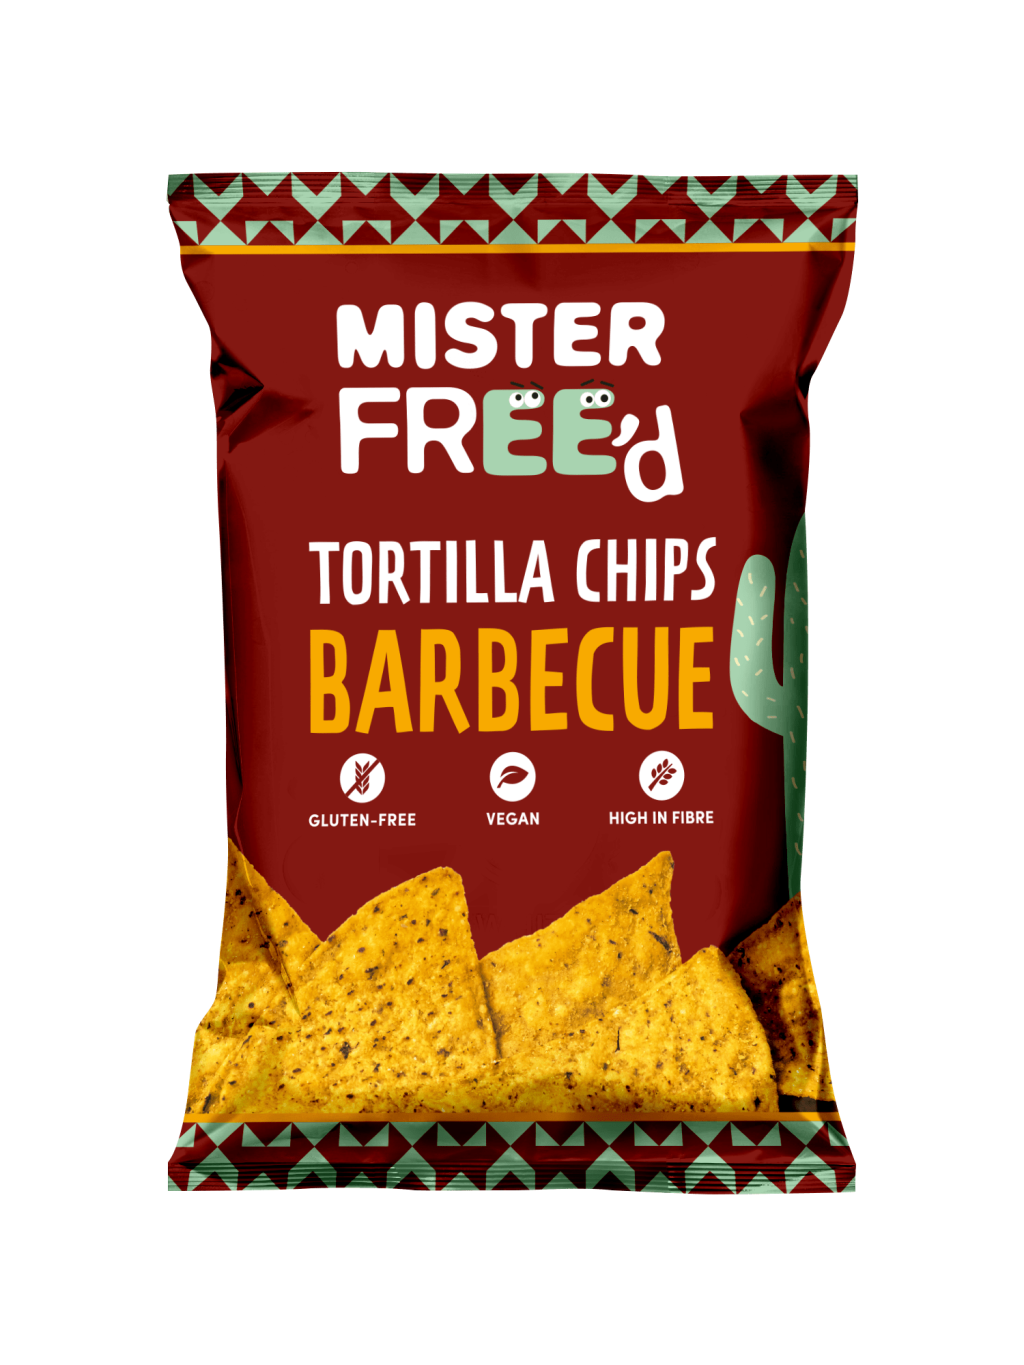 MISTER FREE'D Tortilla Chips With Barbecue